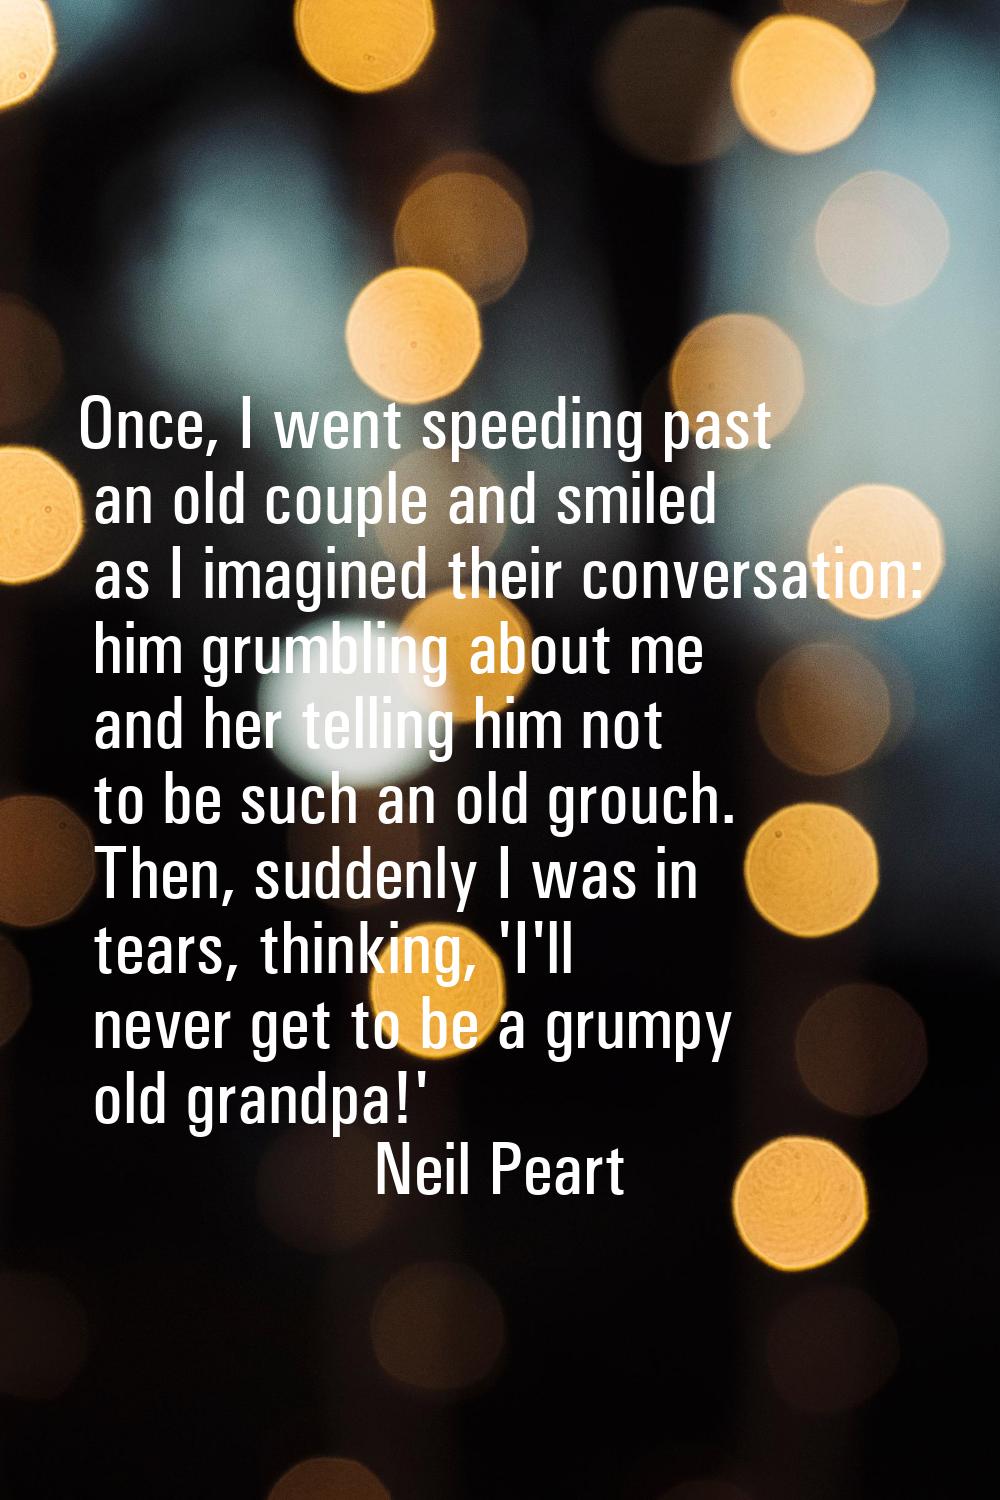 Once, I went speeding past an old couple and smiled as I imagined their conversation: him grumbling